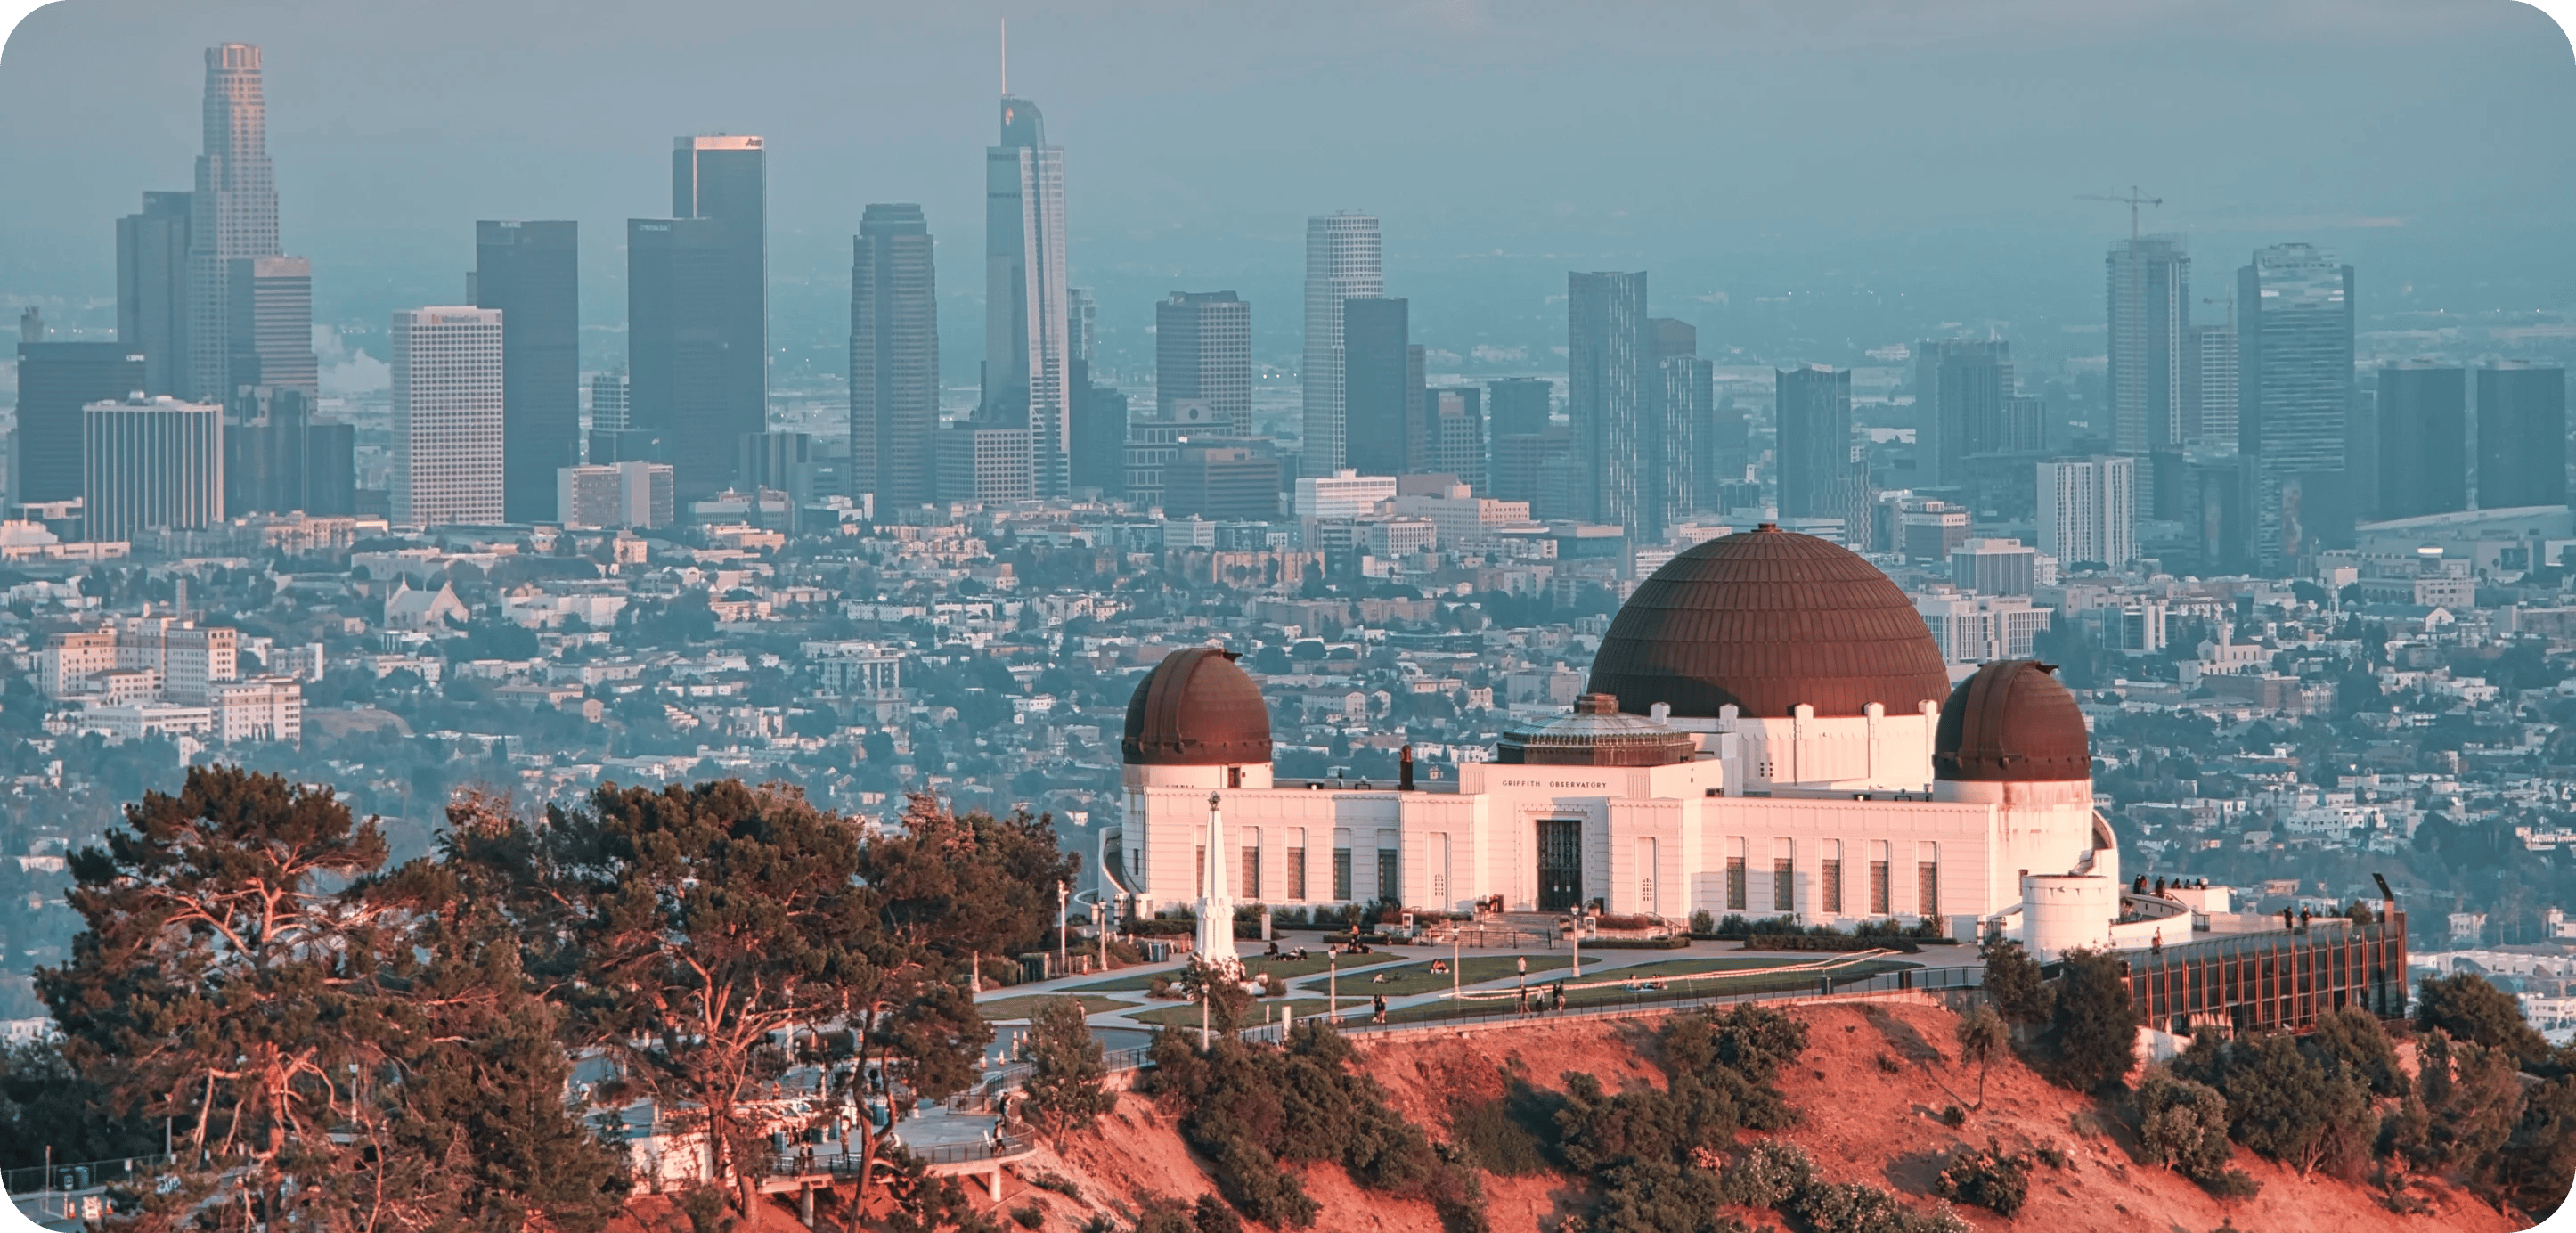 selective-focus-shot-of-the-griffith-observatory-i-2023-11-27-04-58-14-utc 1